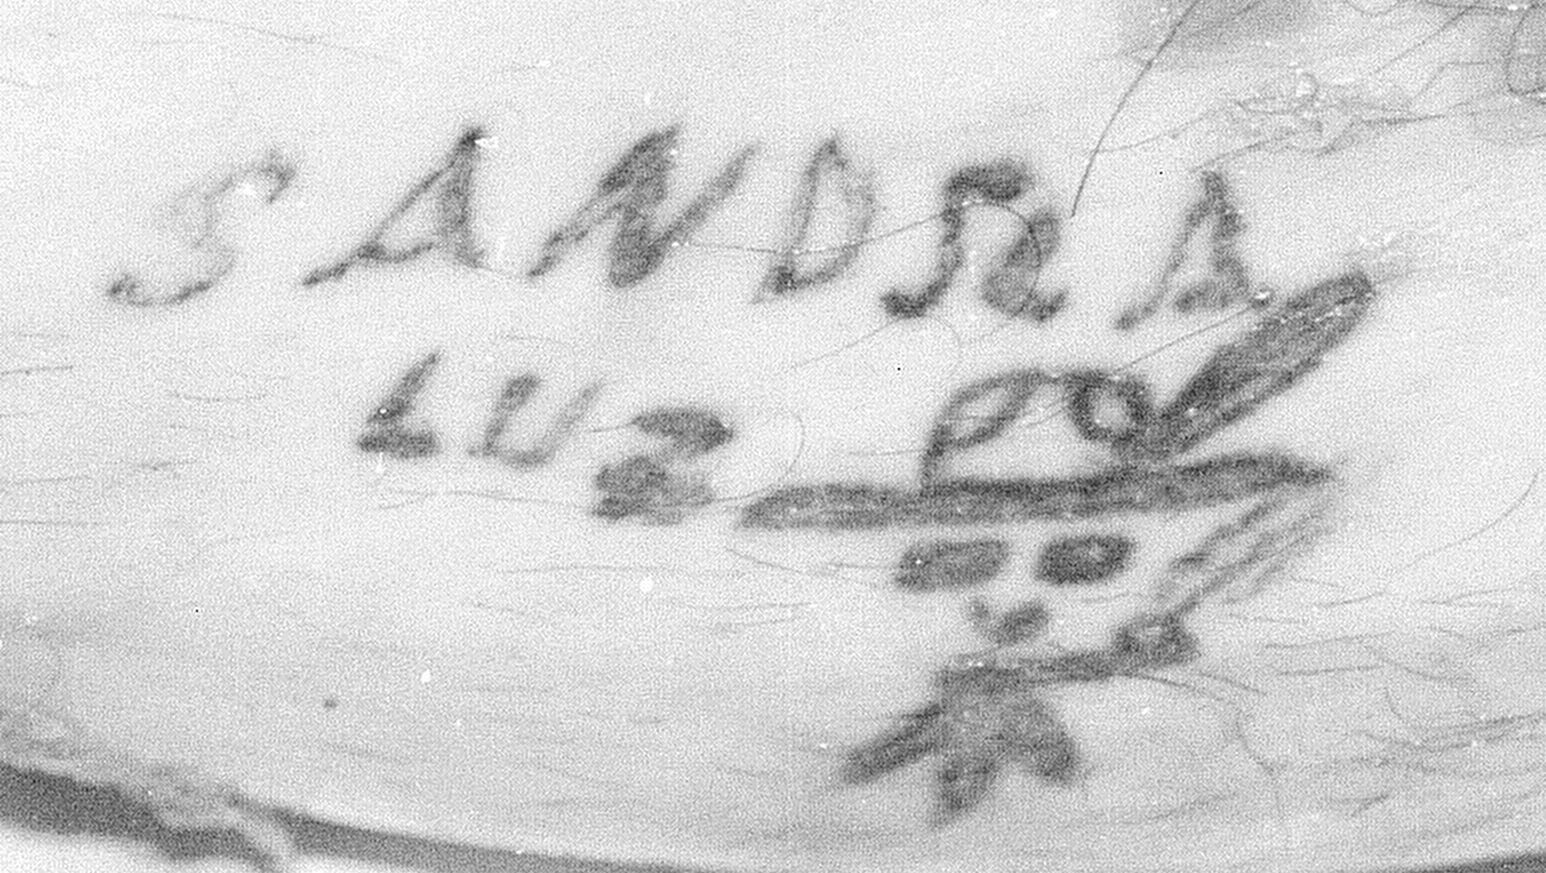 A tattoo on the body of an unidentified man found in the All-American Canal on April 2, 1993. Photo from John Doe Case #9312645